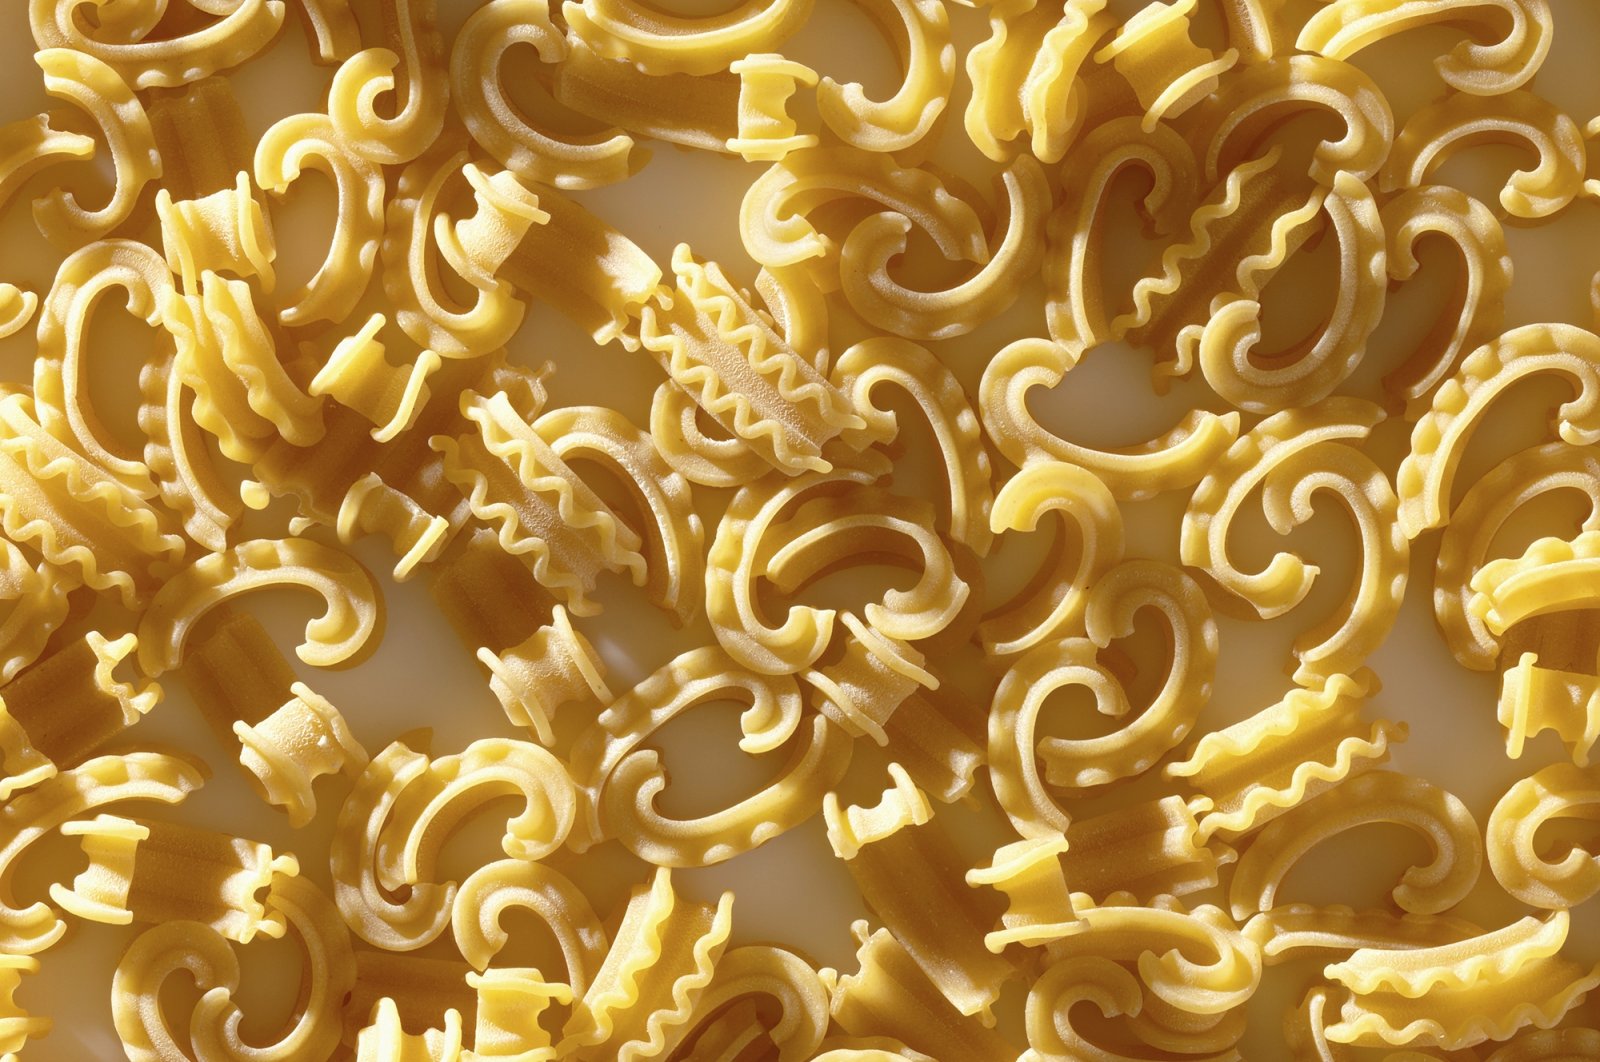 The new pasta shape called Cascatelli, created by food writer and podcaster Dan Pashman. (AP Photo)